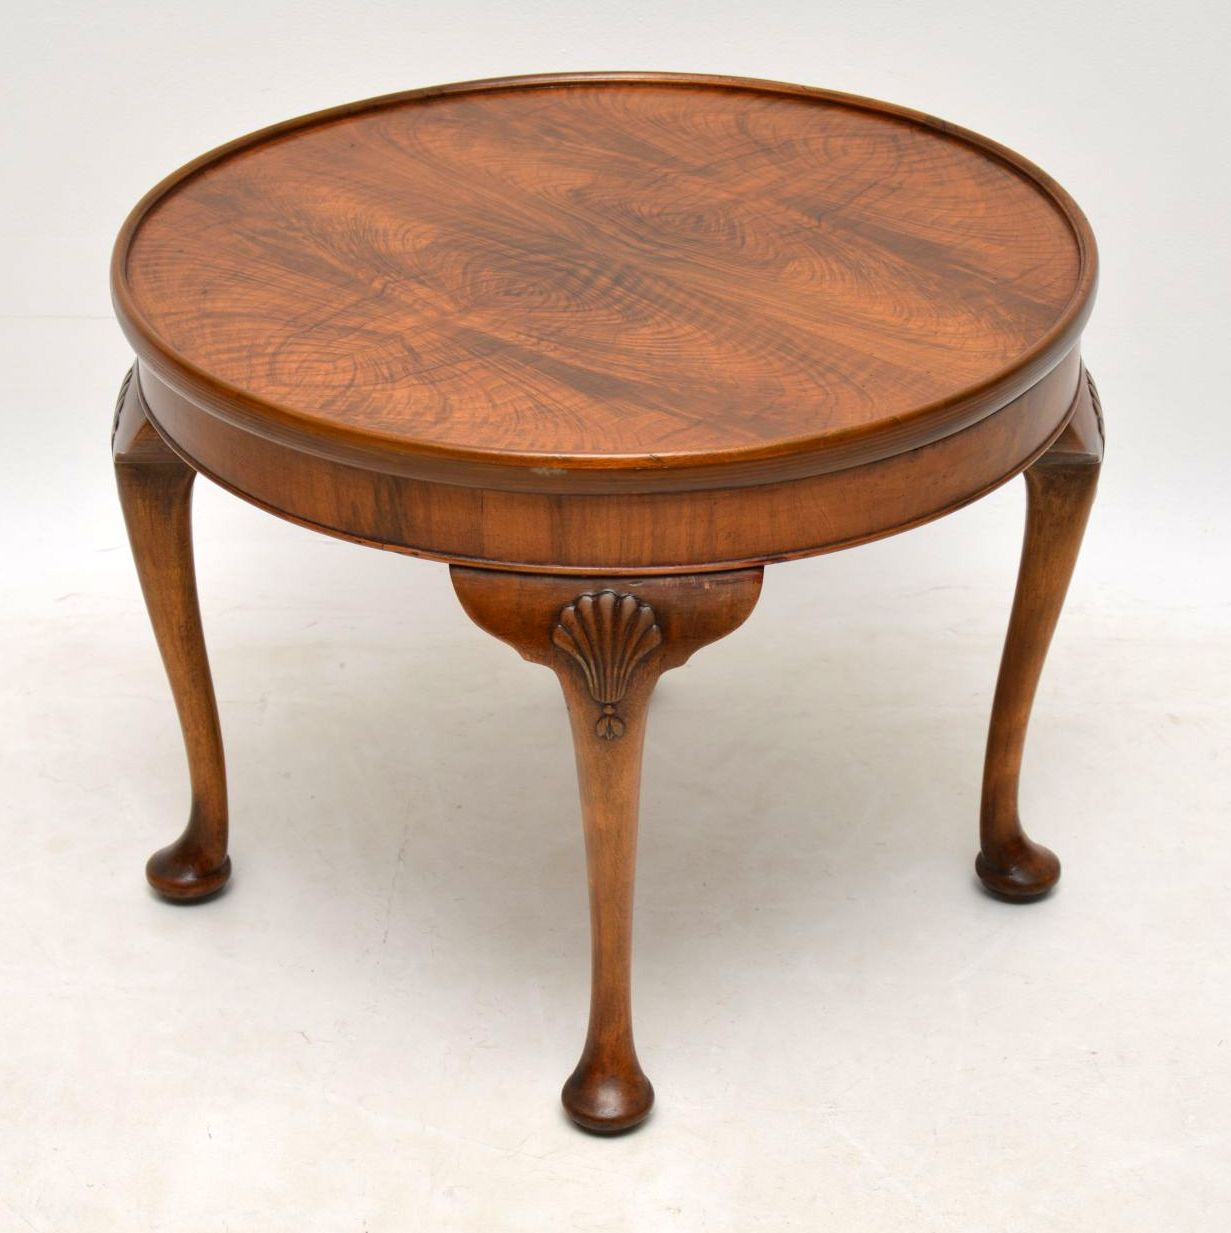 Antique Figured Walnut Coffee Table Marylebone Antiques Sellers throughout dimensions 1231 X 1233